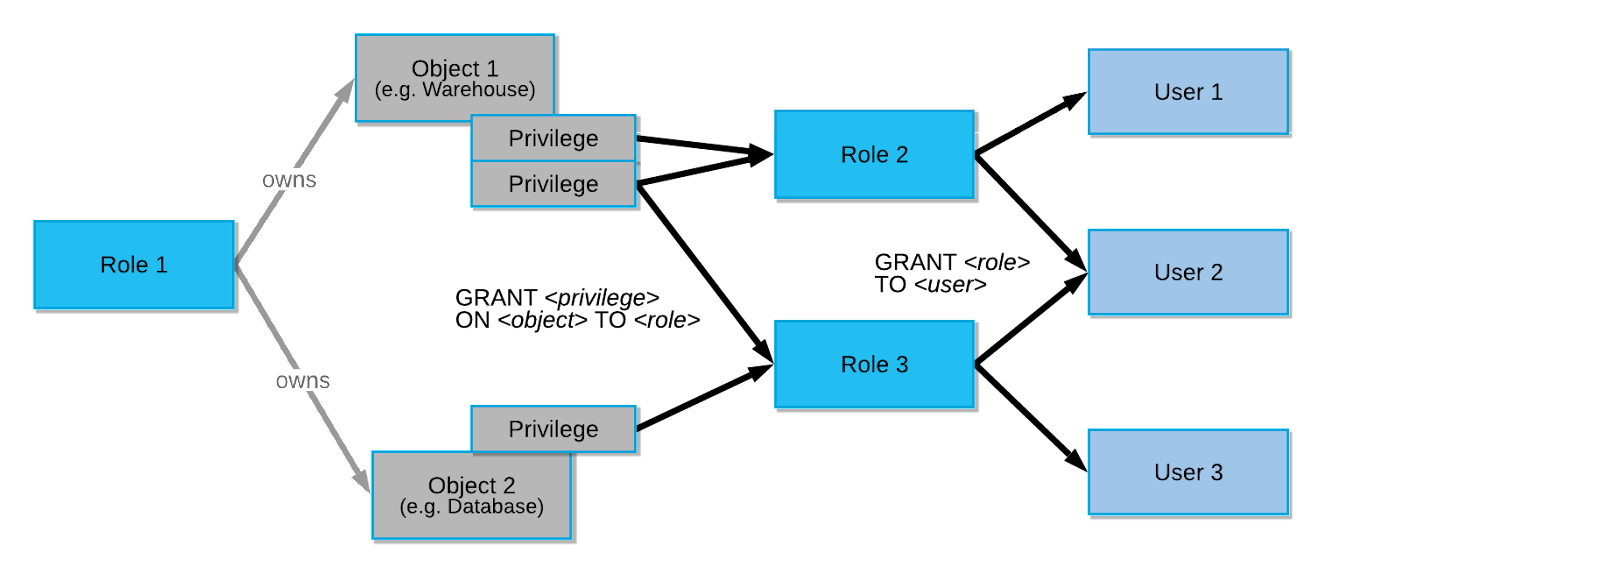 Access Control Relationships in Snowflake - snowflake roles